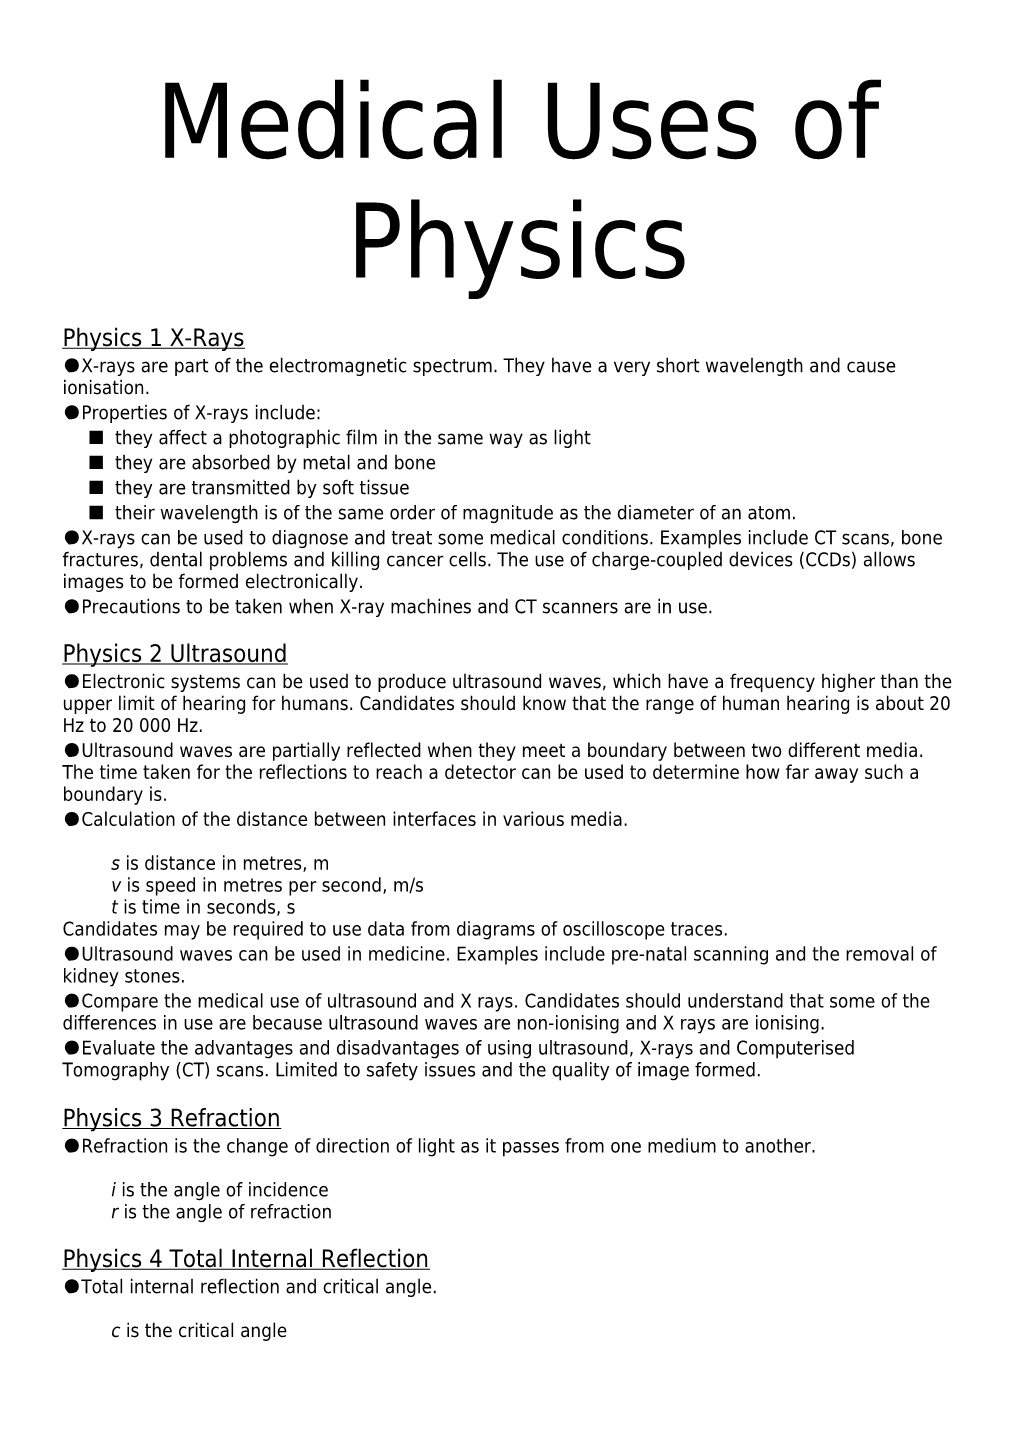 Medical Uses of Physics